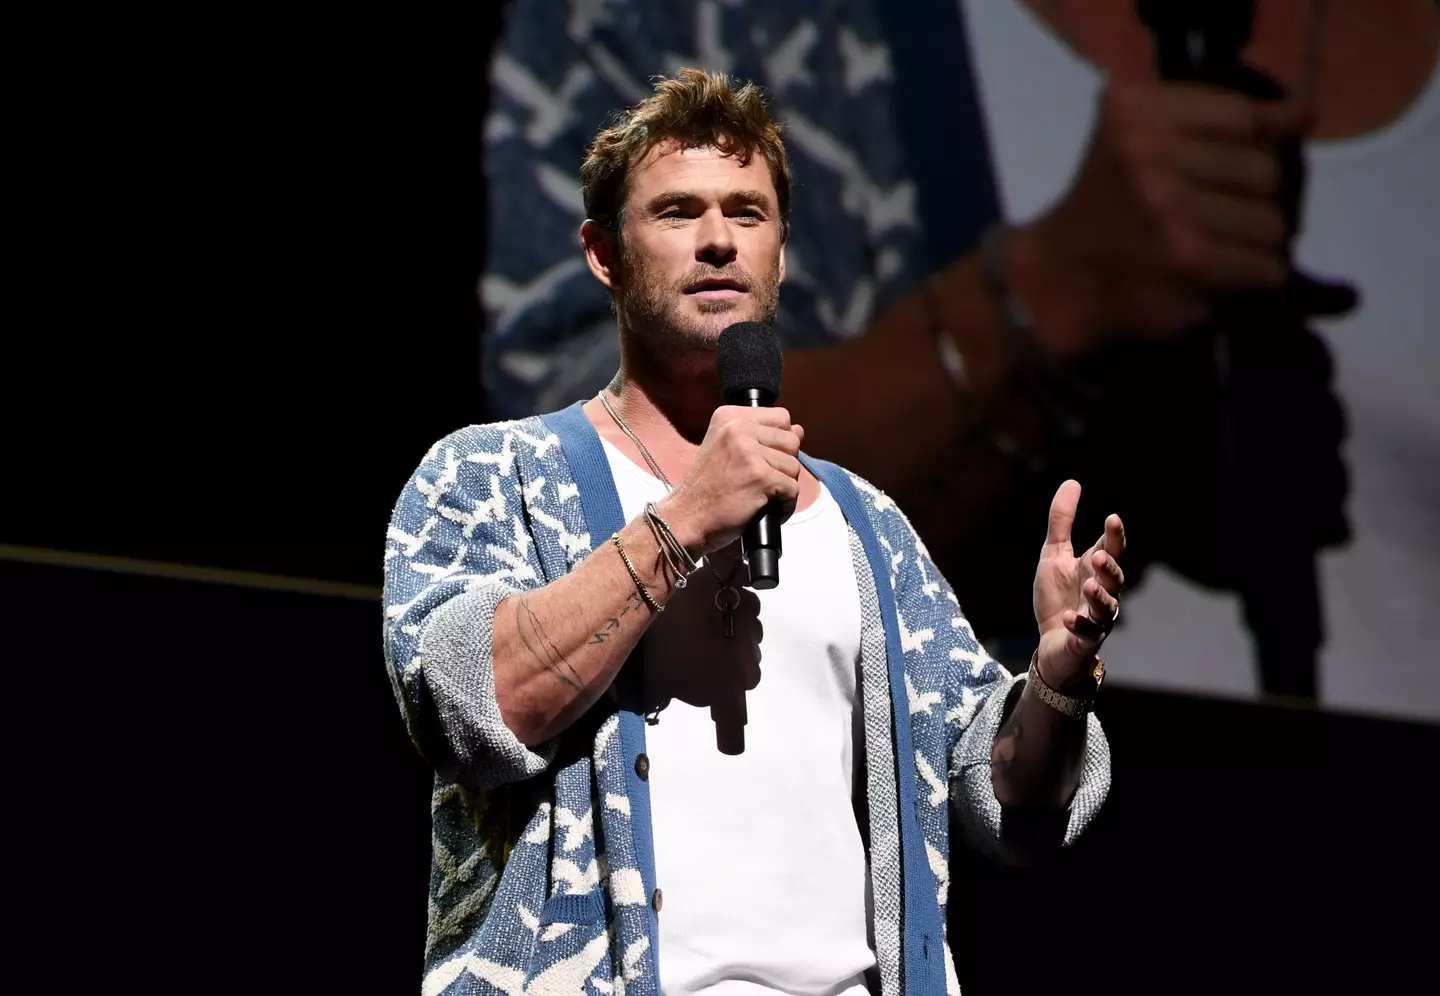 Fans of the film franchise aren't sure about Chris Hemsworth's Optimus Prime voice (Candice Ward/Getty Images for Paramount Pictures)